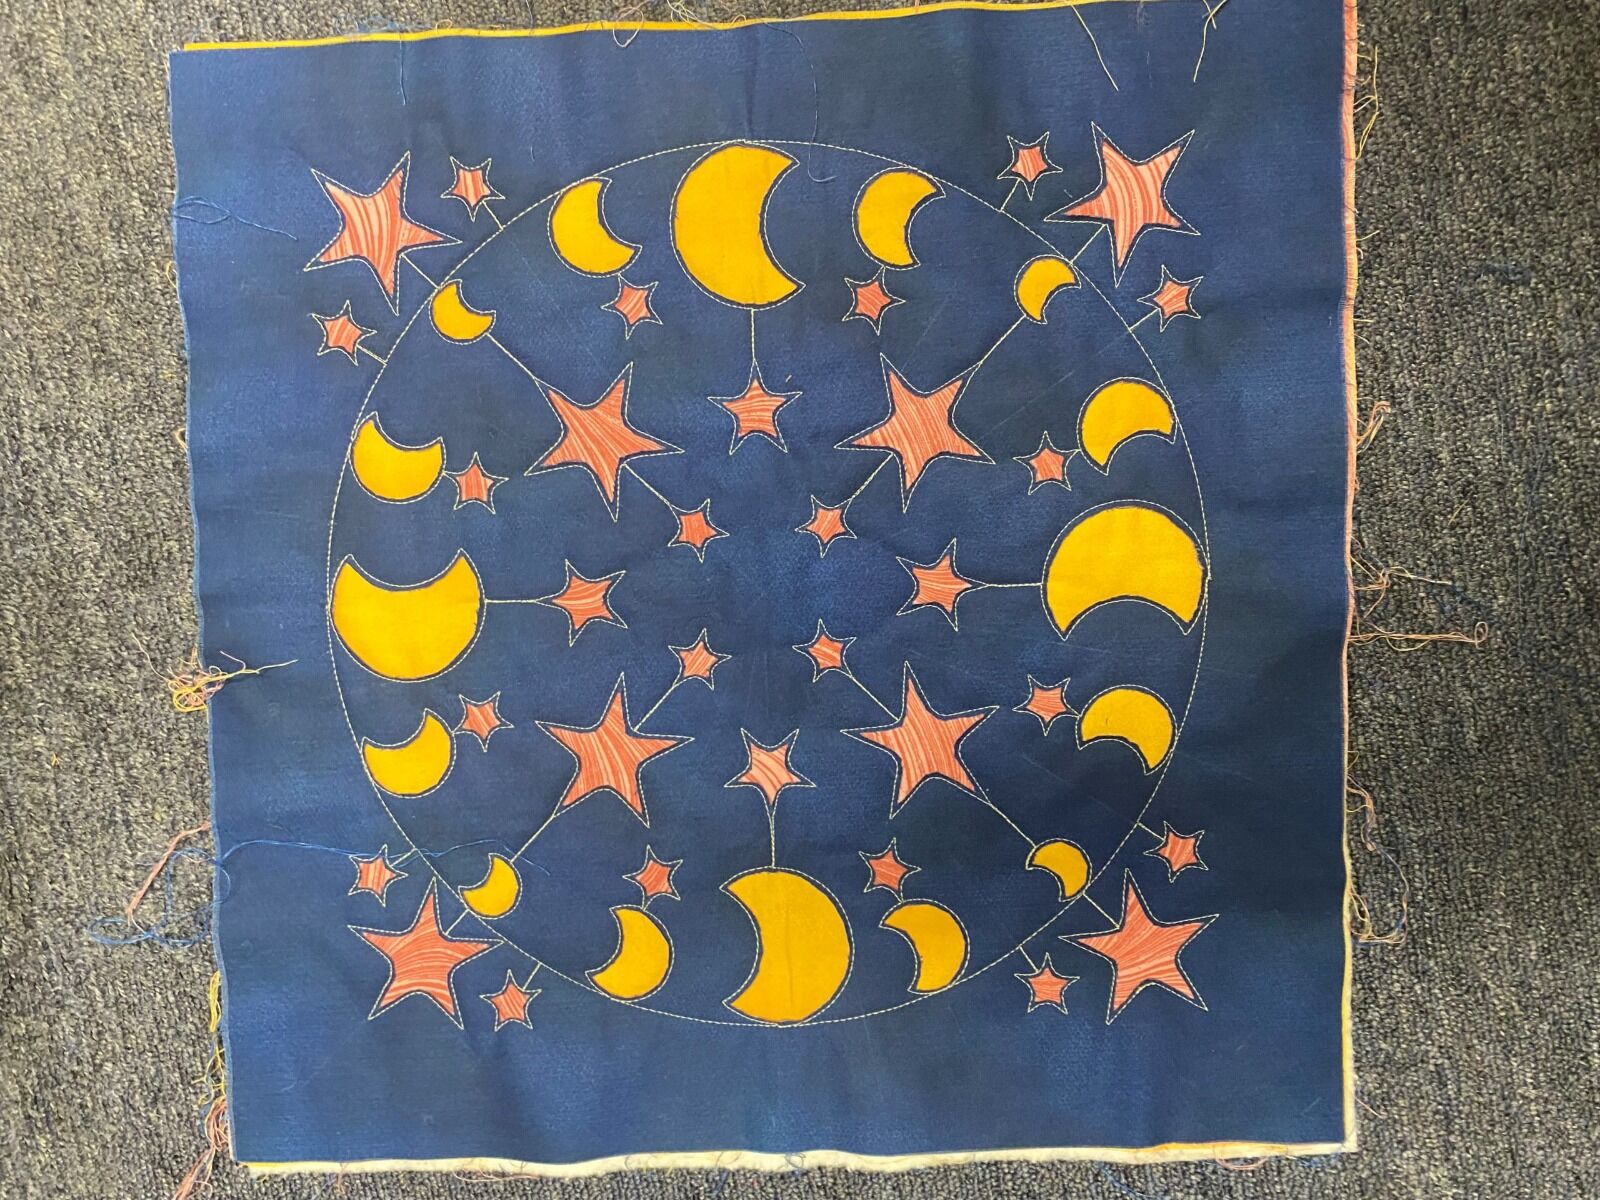 ,,,,,,,,,,,,,,,,,,,,,Sew Steady Starry Nights Ruler Work and Embroidery Club